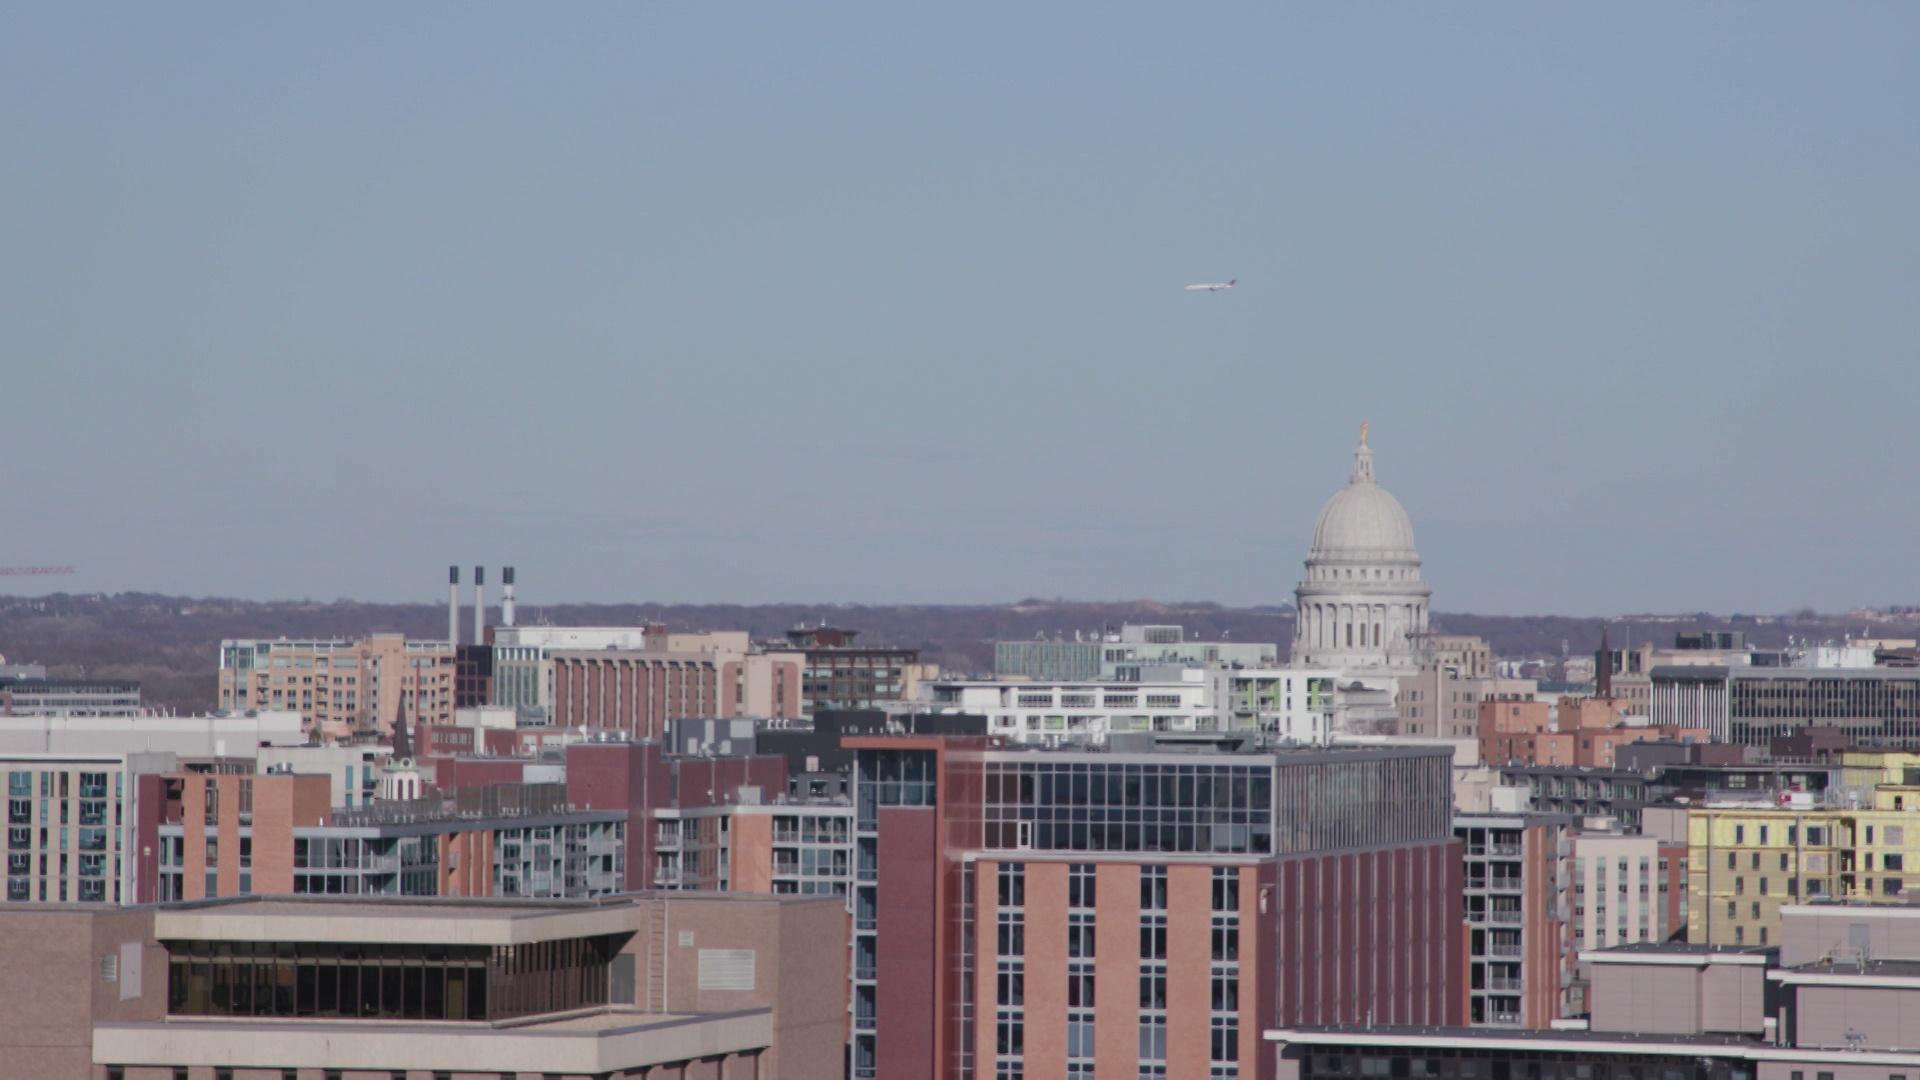 Why is Madison considered a climate haven going forward?